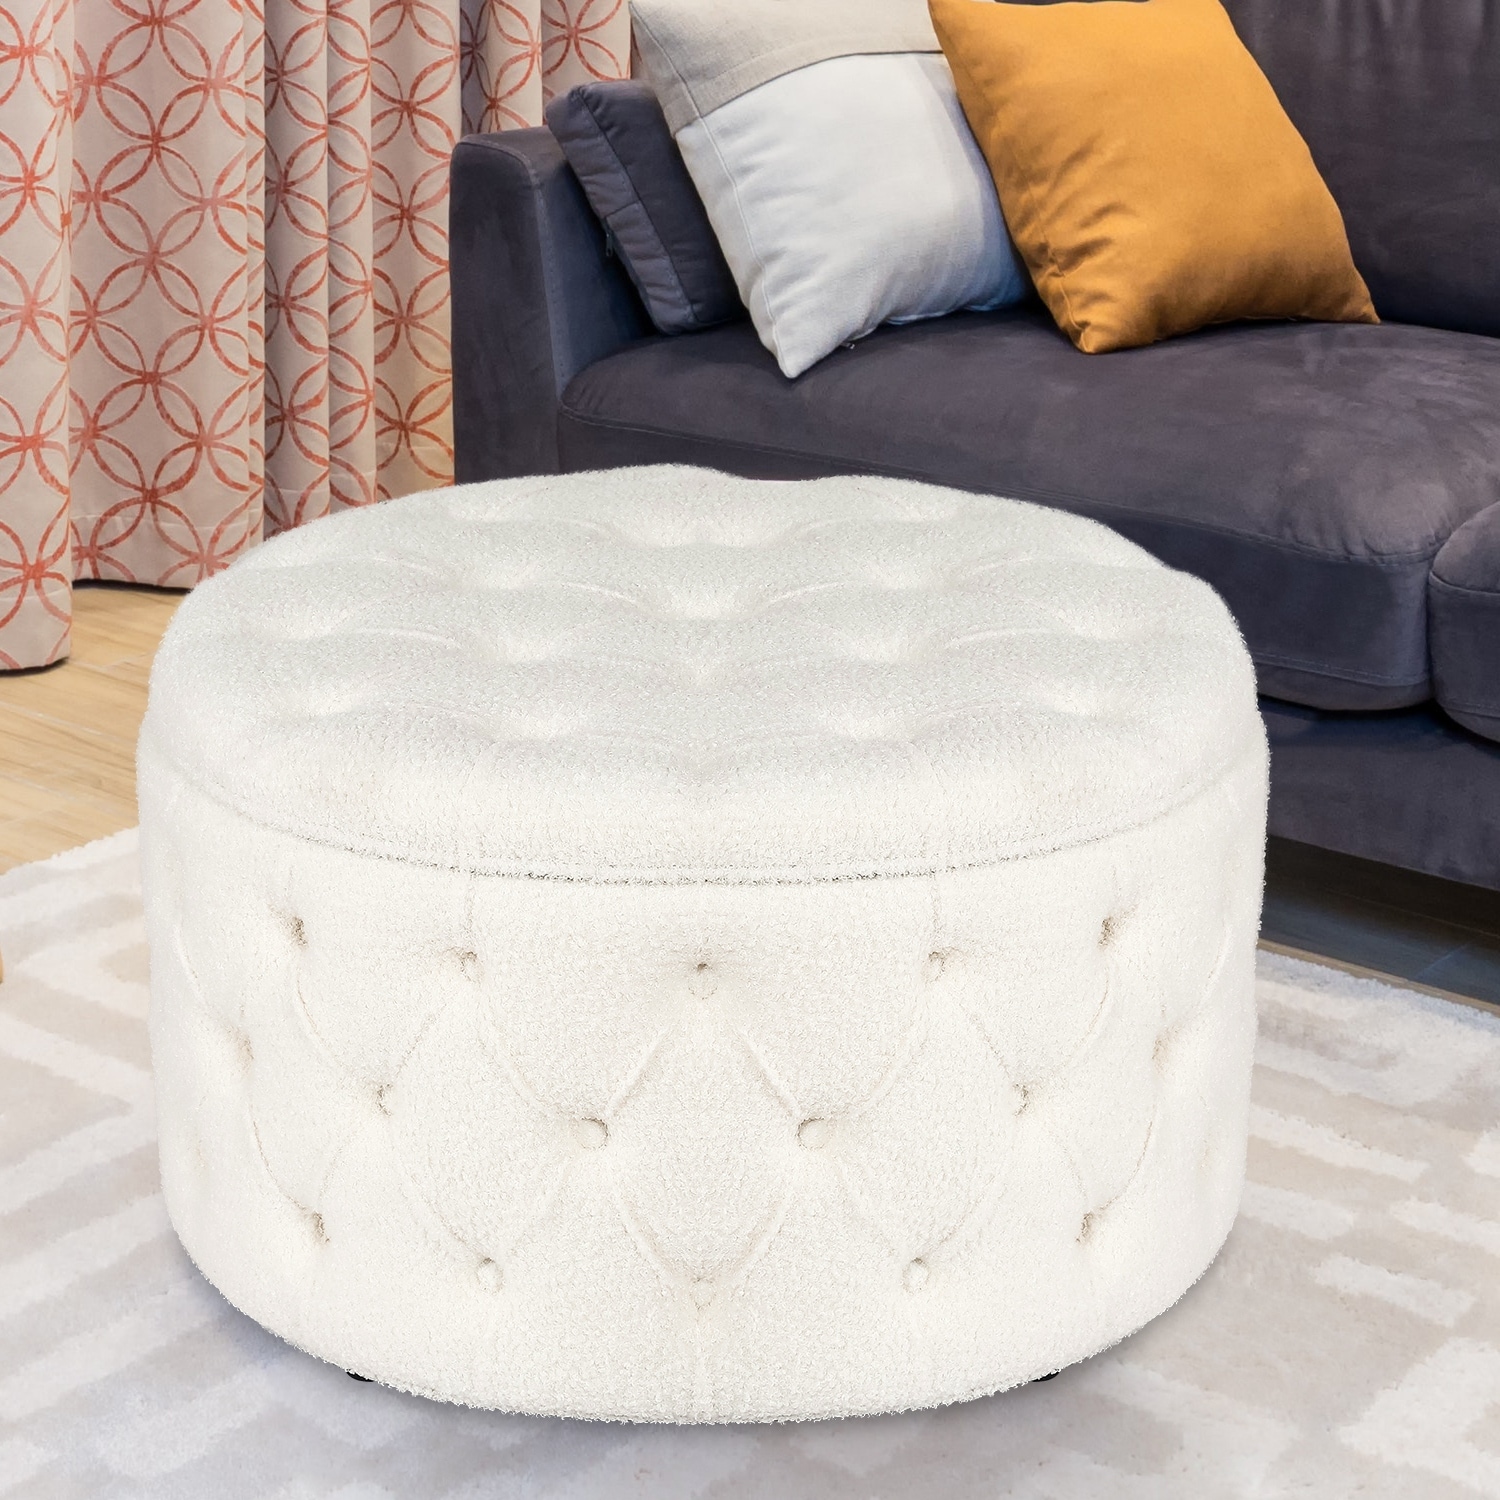 https://ak1.ostkcdn.com/images/products/is/images/direct/3ae1ba76c63c9e6dd9945a482e74d0af94d3d8fd/Adeco-Round-Storage-Ottoman-Button-Tufted-Footrest-Stool-Bench.jpg